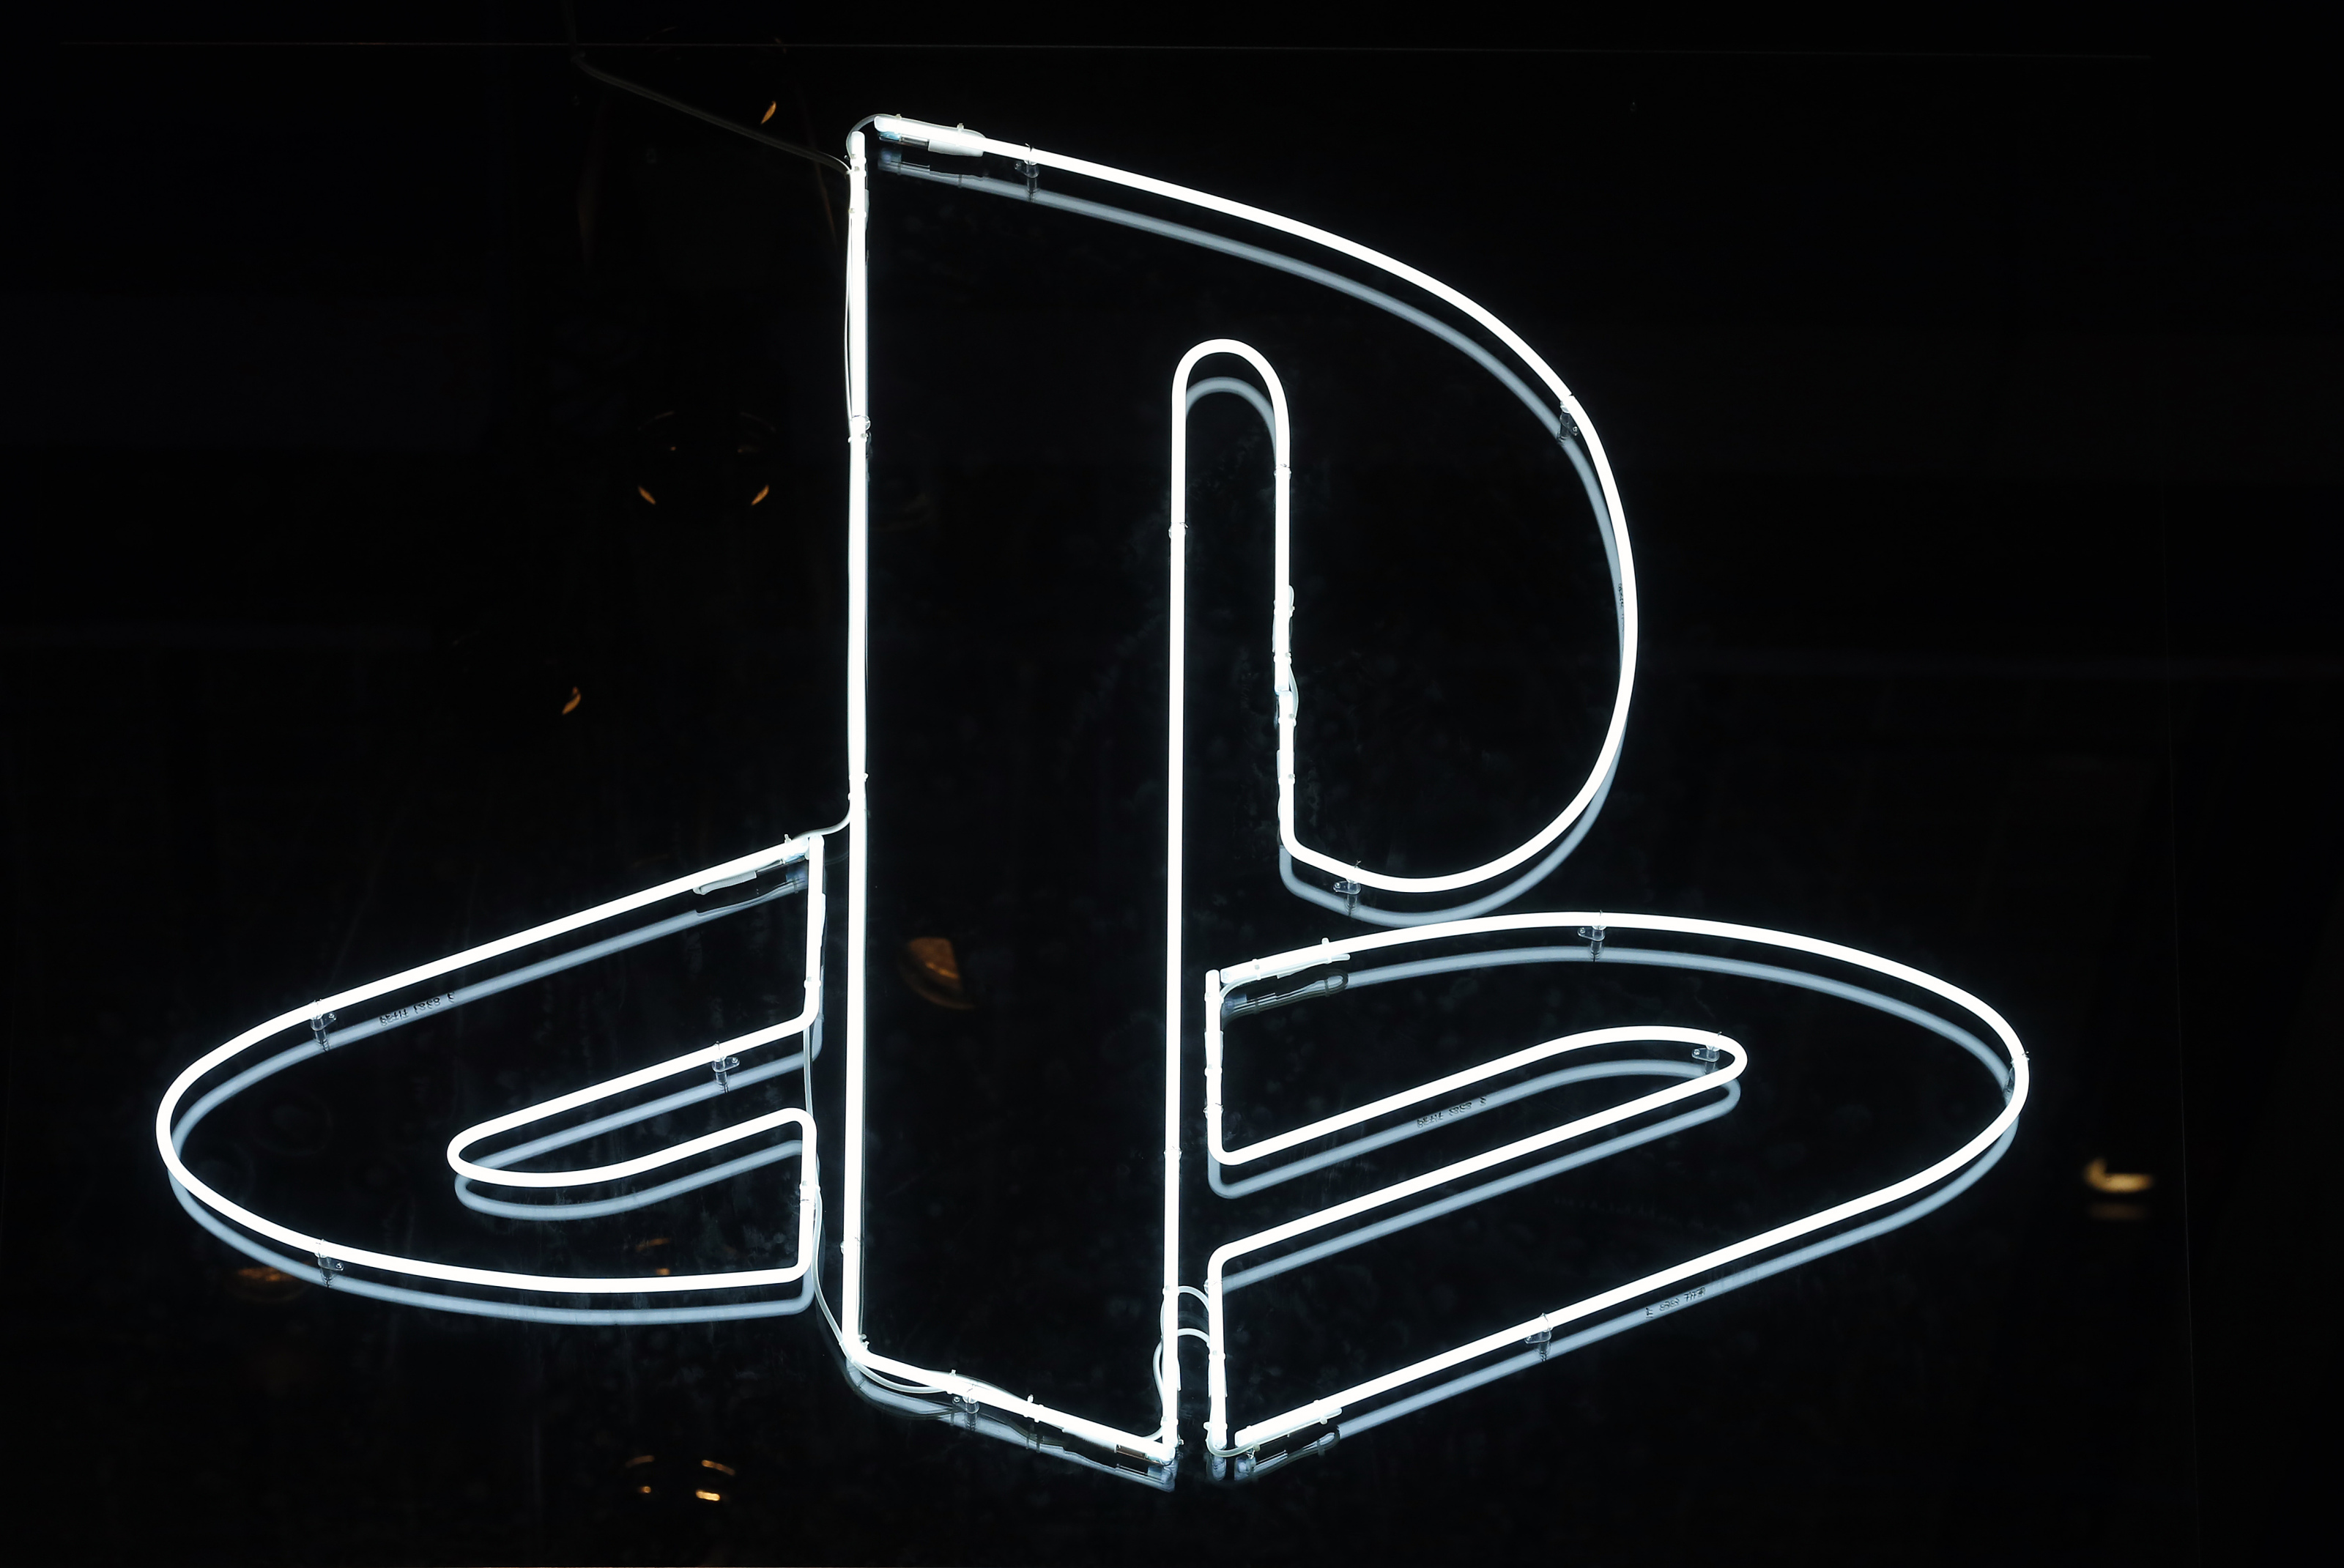 PlayStation Plus April 2022 Free PS4, PS5 Games Now Available